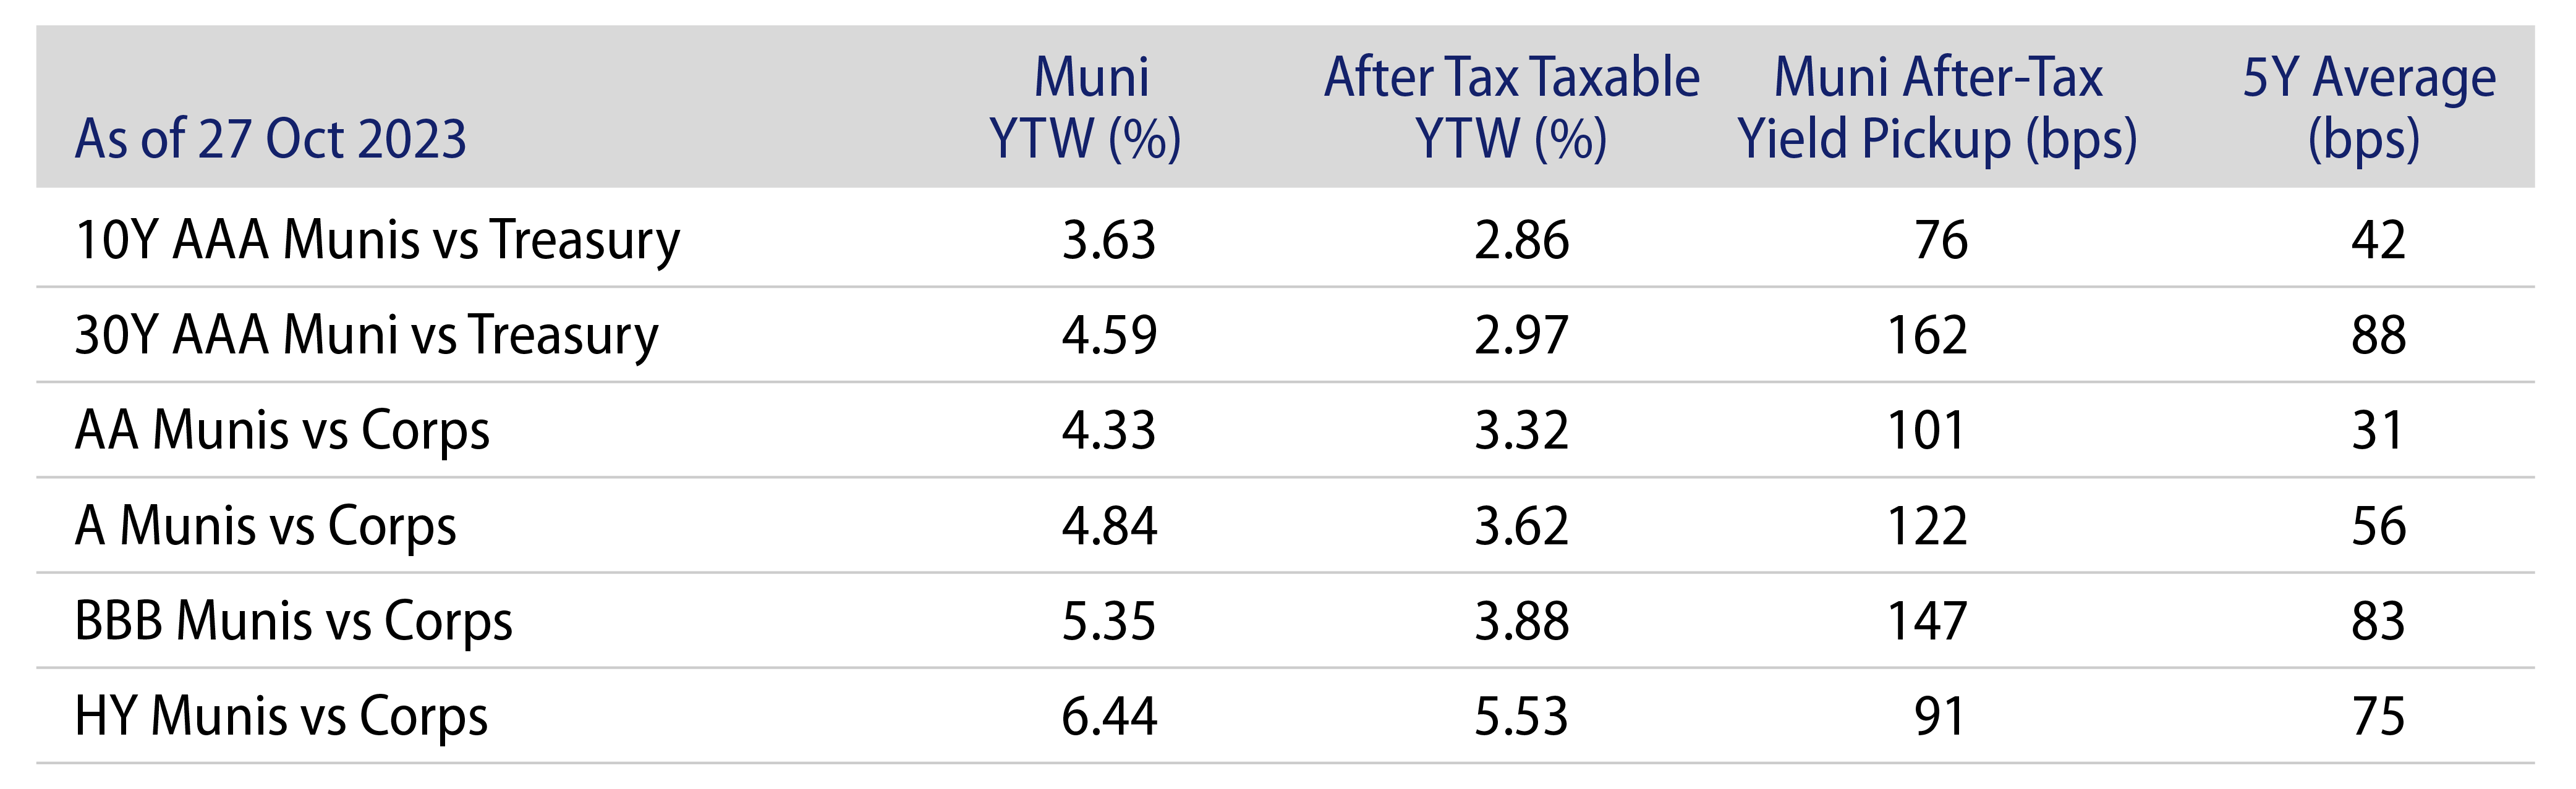 Explore Municipal vs. Taxable Fixed-Income Yields by Quality 